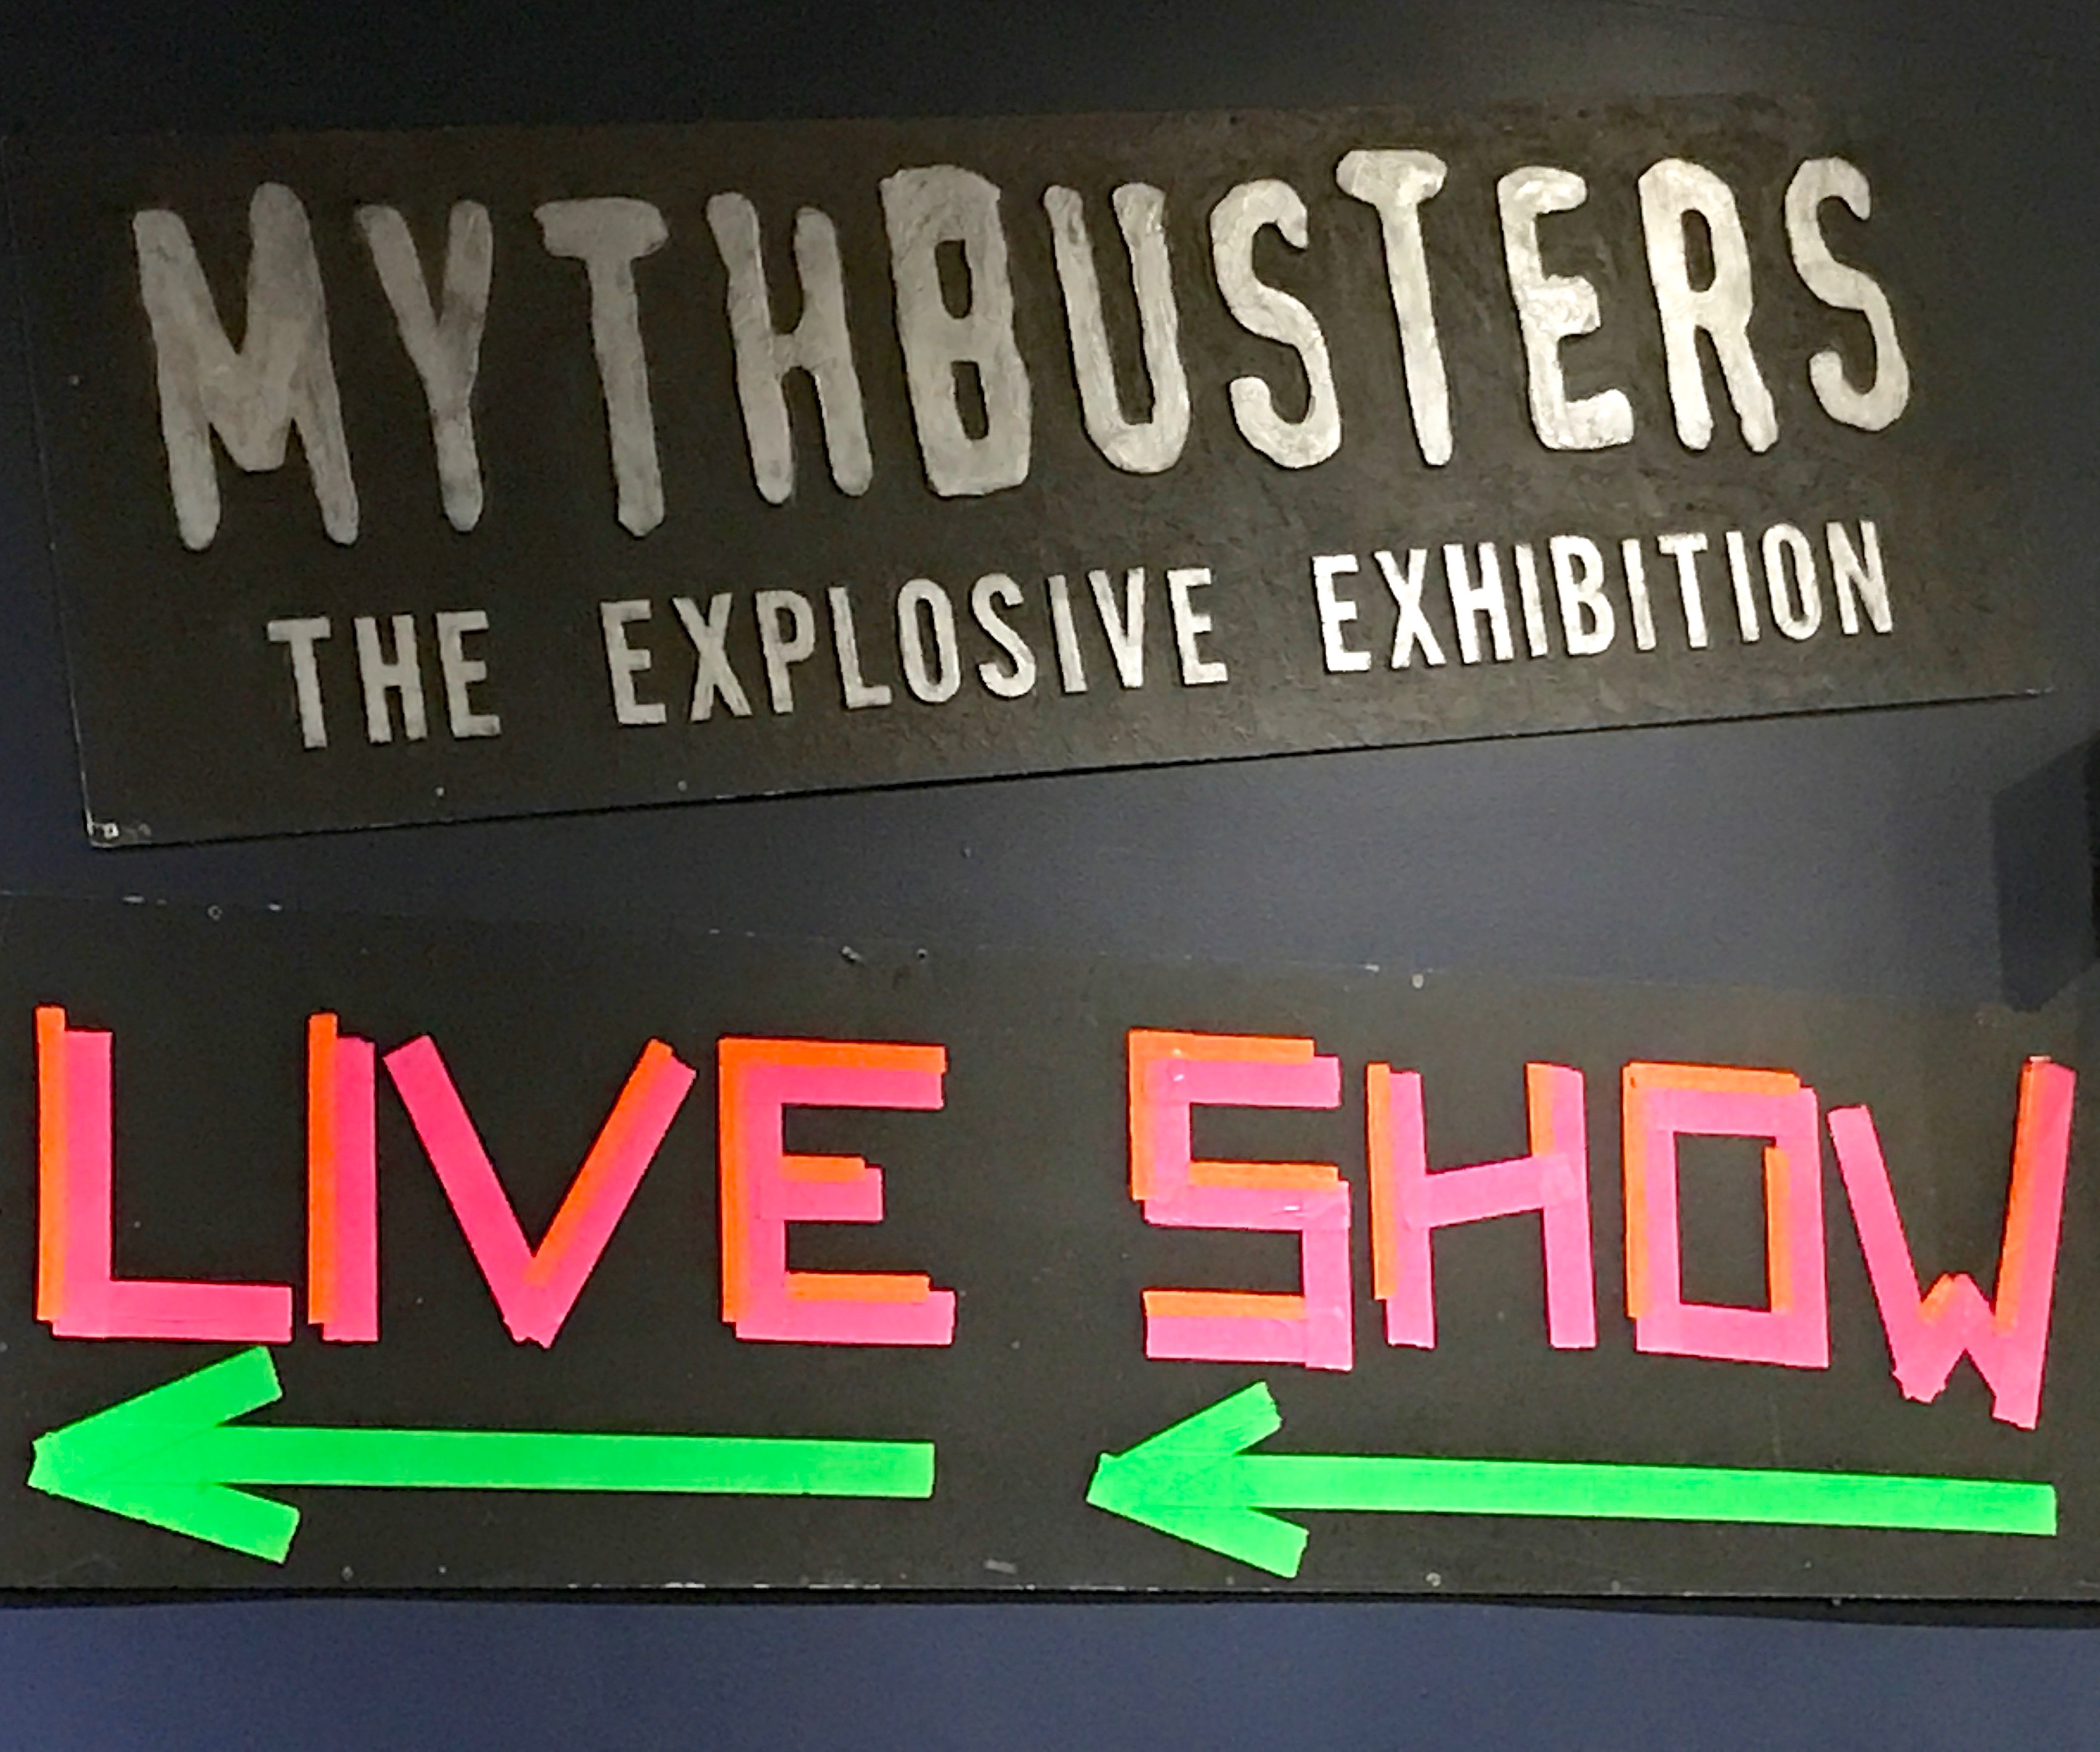 MythBusters: The Explosive Exhibition